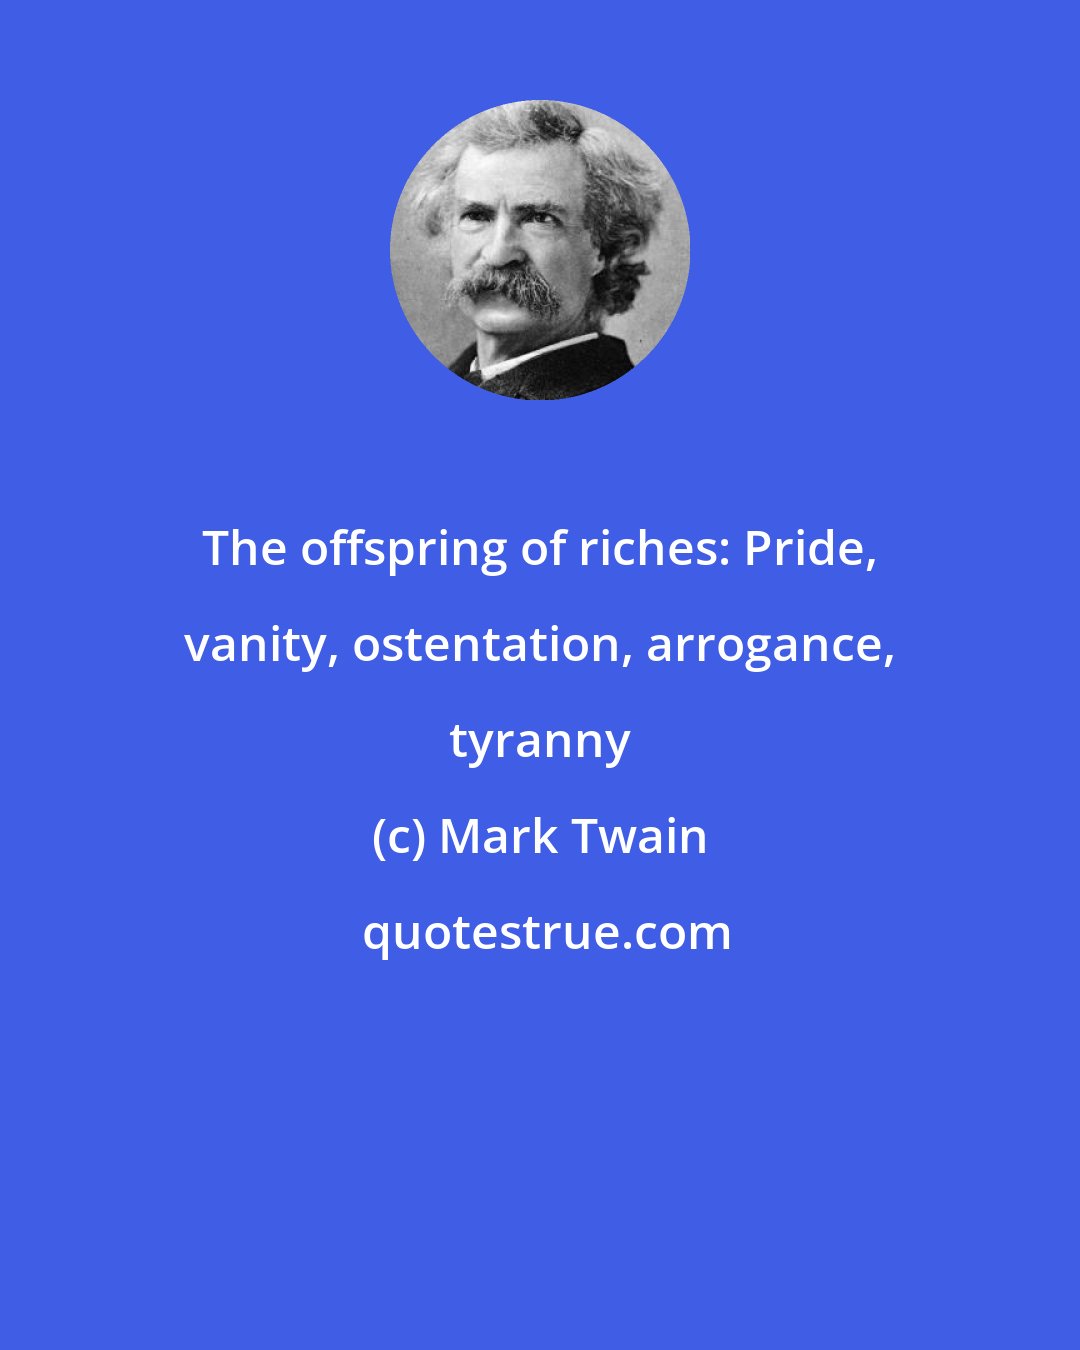 Mark Twain: The offspring of riches: Pride, vanity, ostentation, arrogance, tyranny